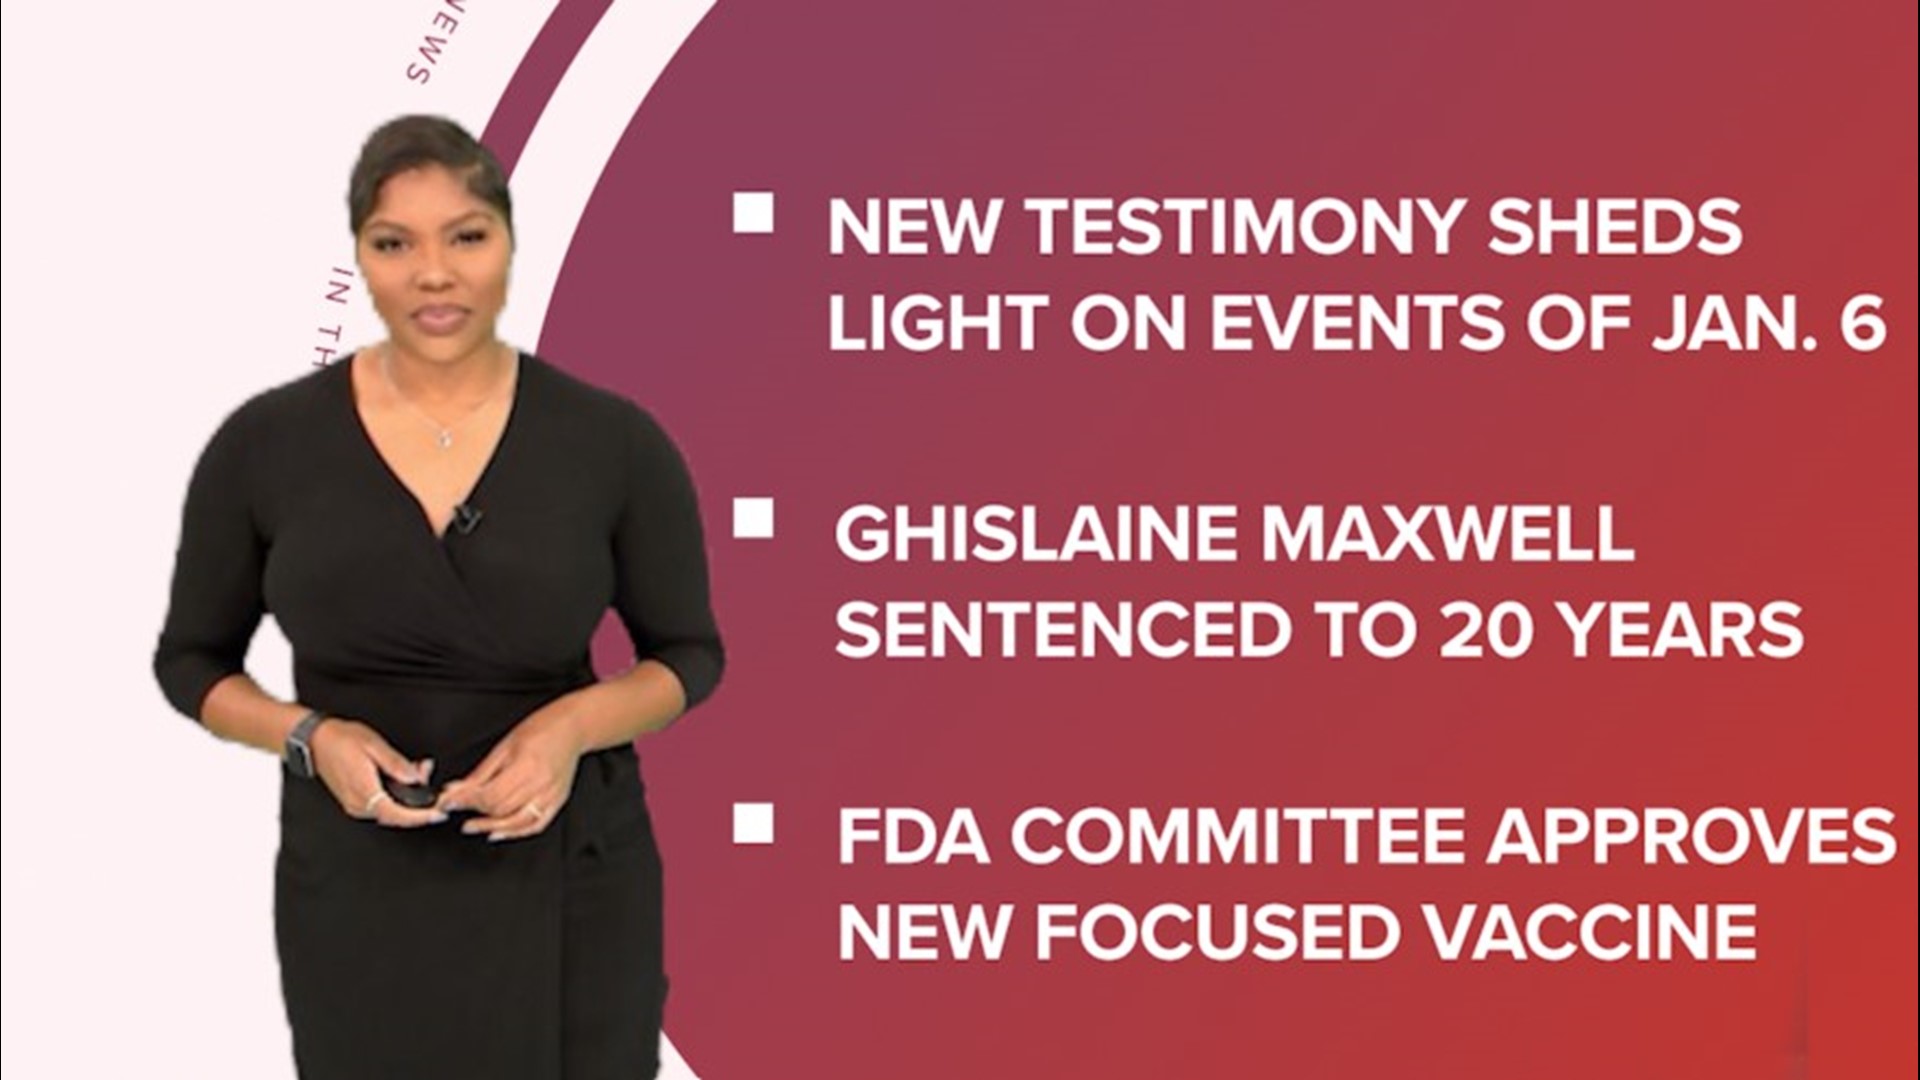 A look at what is happening across the U.S. from explosive Jan. 6 testimony, Ghislaine Maxwell sentenced to 20 years and ready to try a new COVID vaccine.